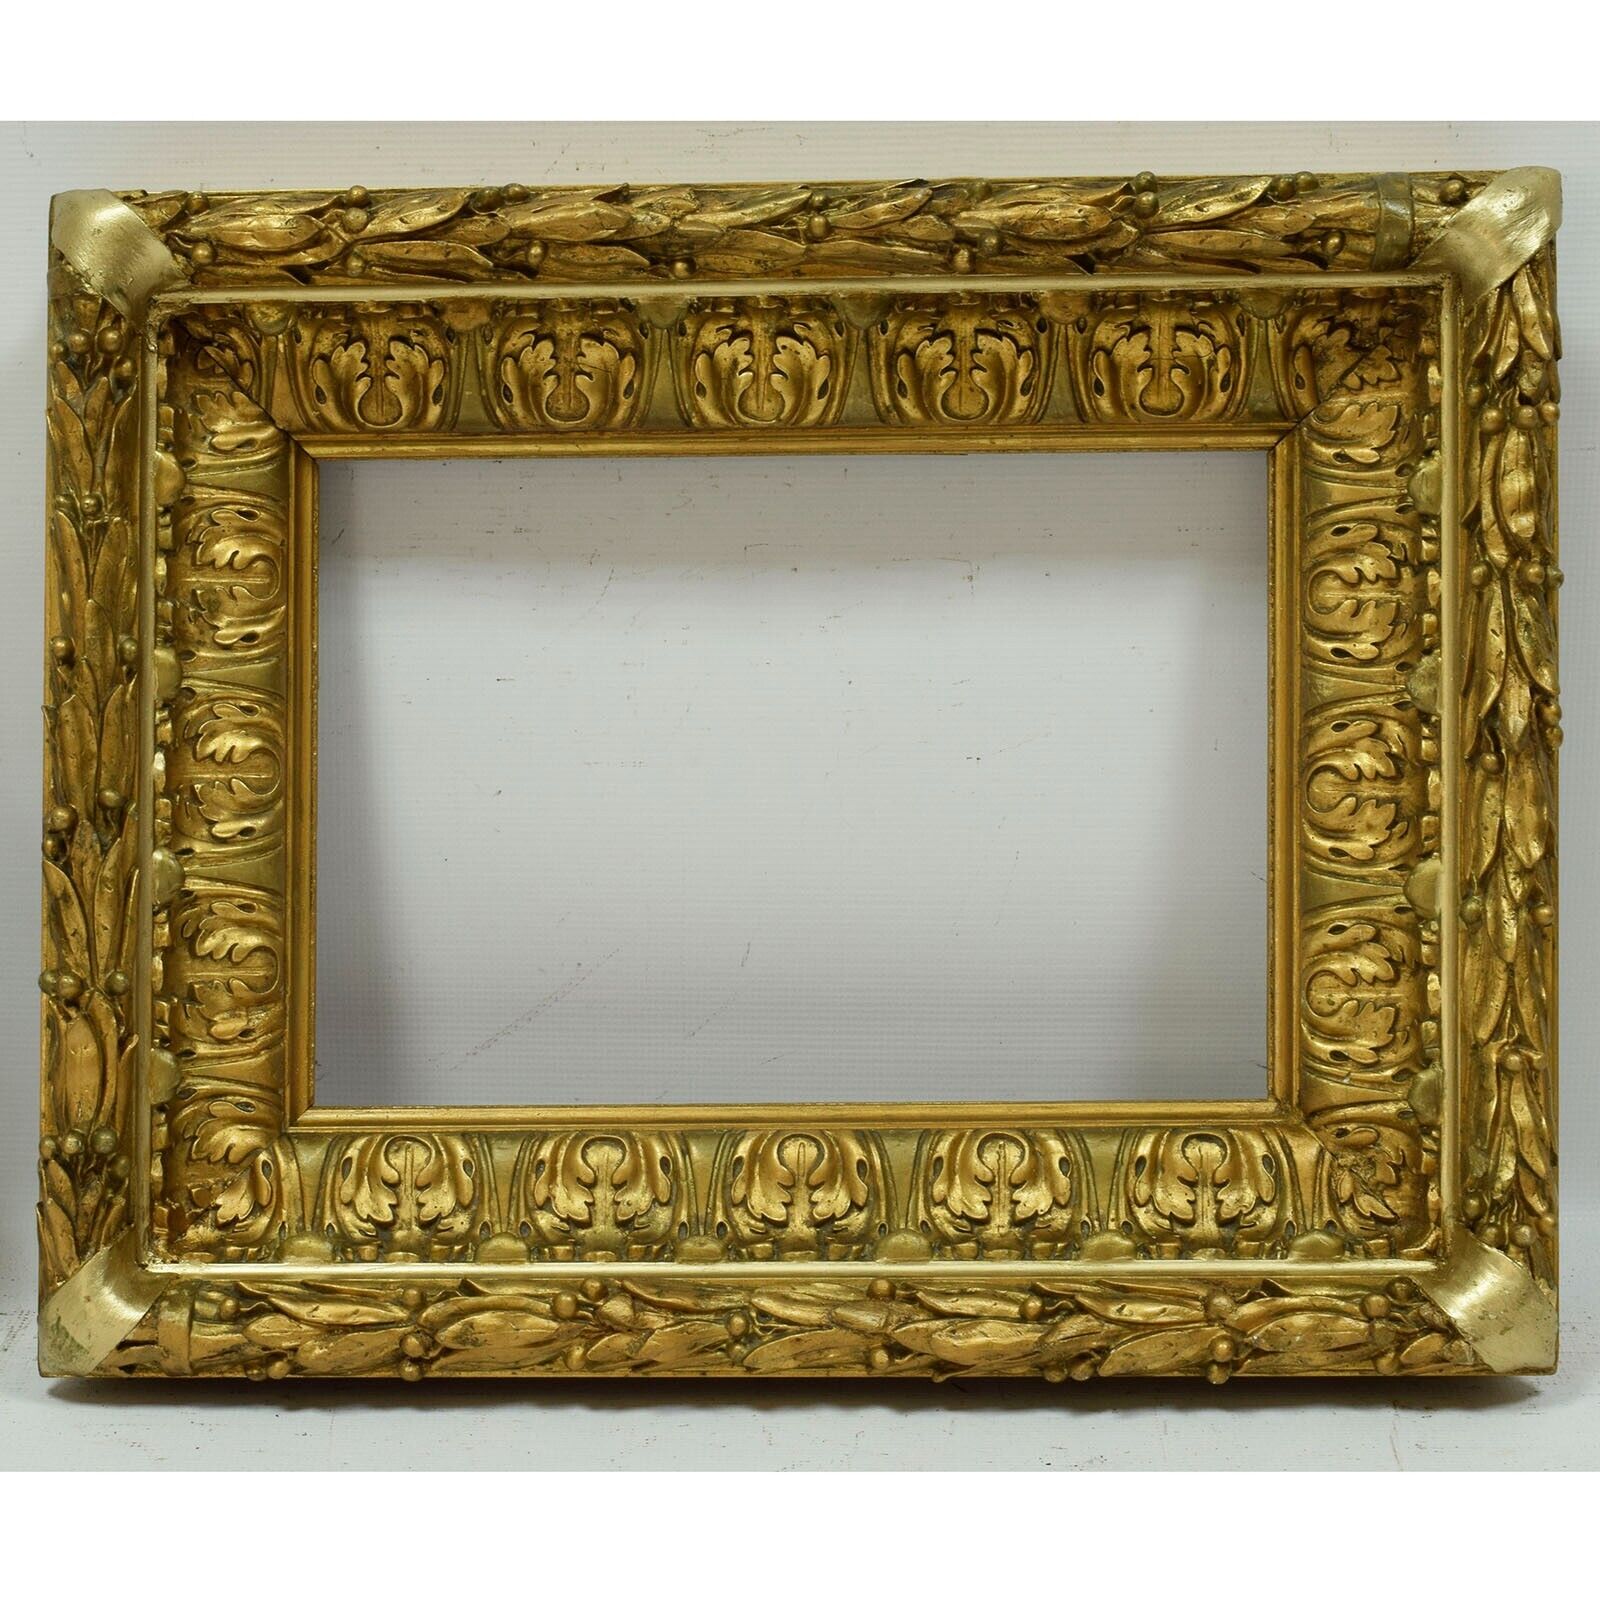 Ca. 1850-1900 Old wooden frame in original condition 15.5 x 11 in